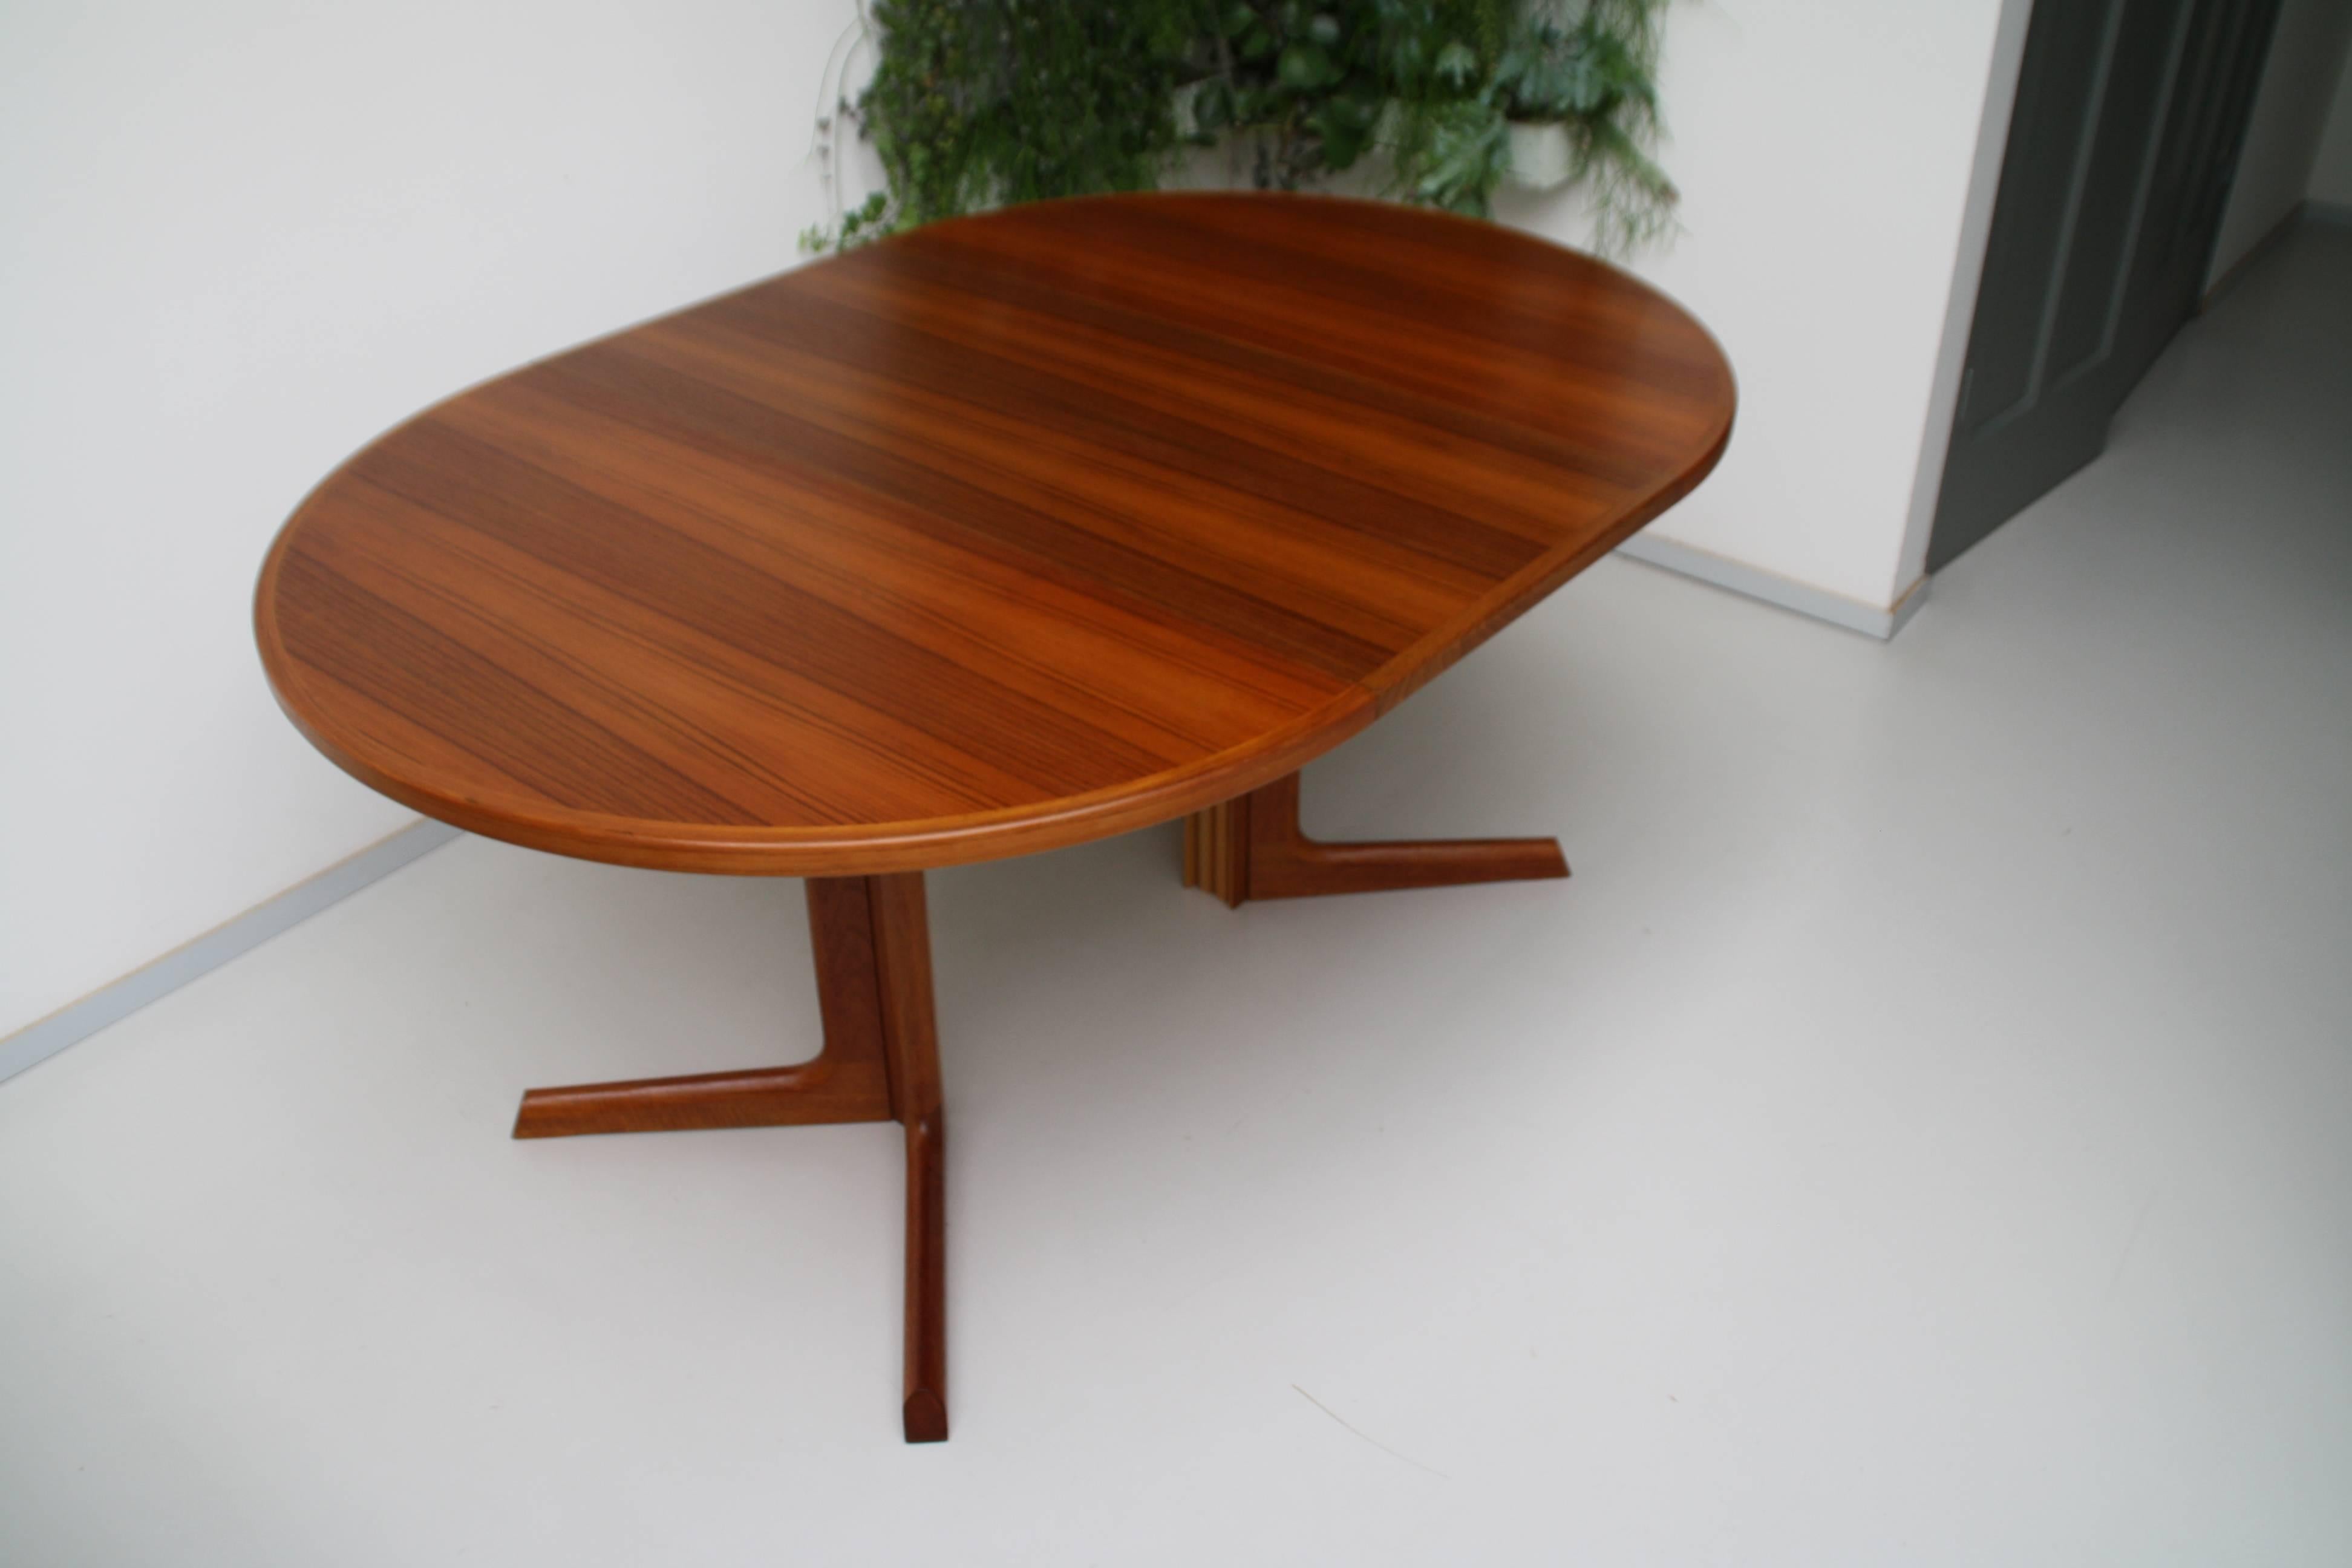 Mid-20th Century Danish Modern Teak Wooden Dining Table by Niels O Møller Round Expandable